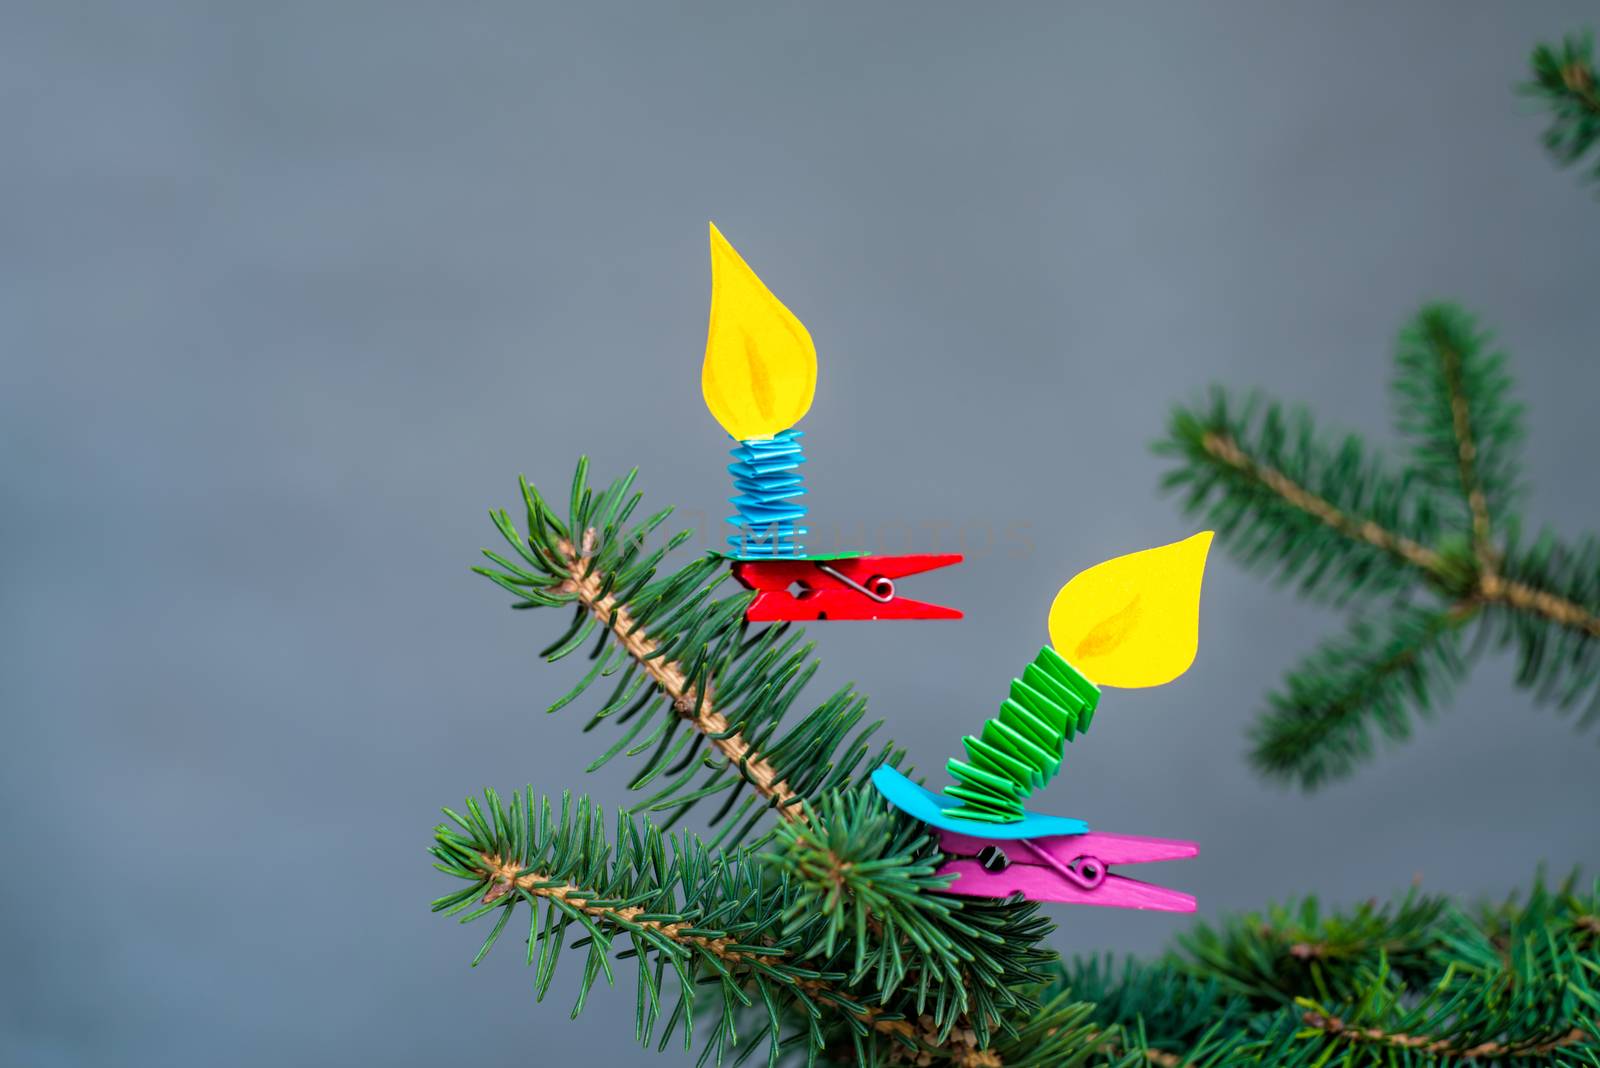 decorative hand made paper candles on clothespins craft on fir tree.christmas crafts by Desperada